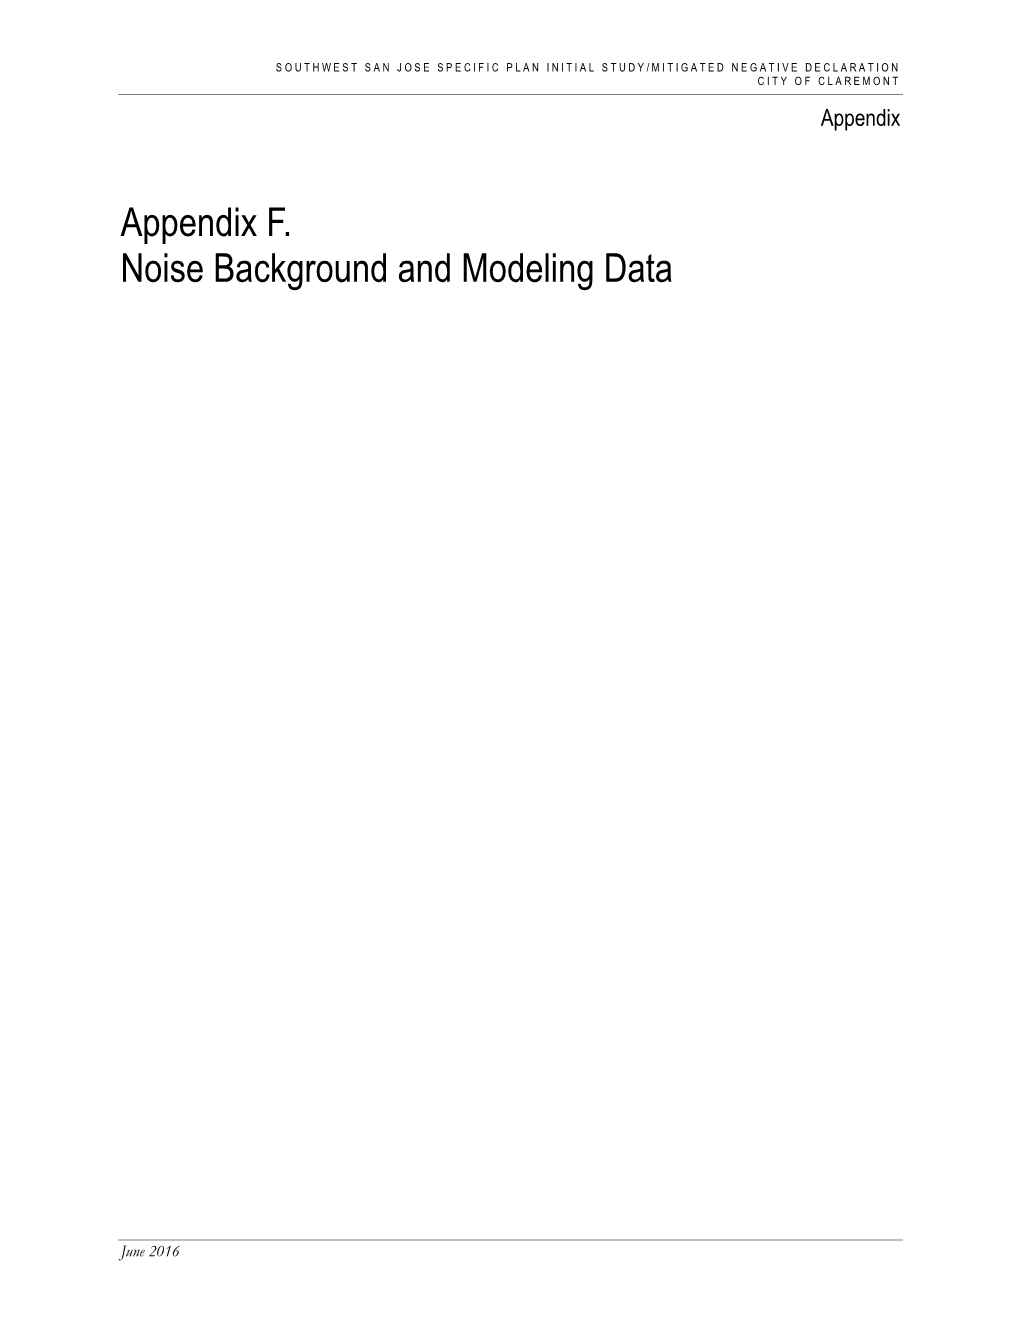 Appendix F. Noise Background and Modeling Data